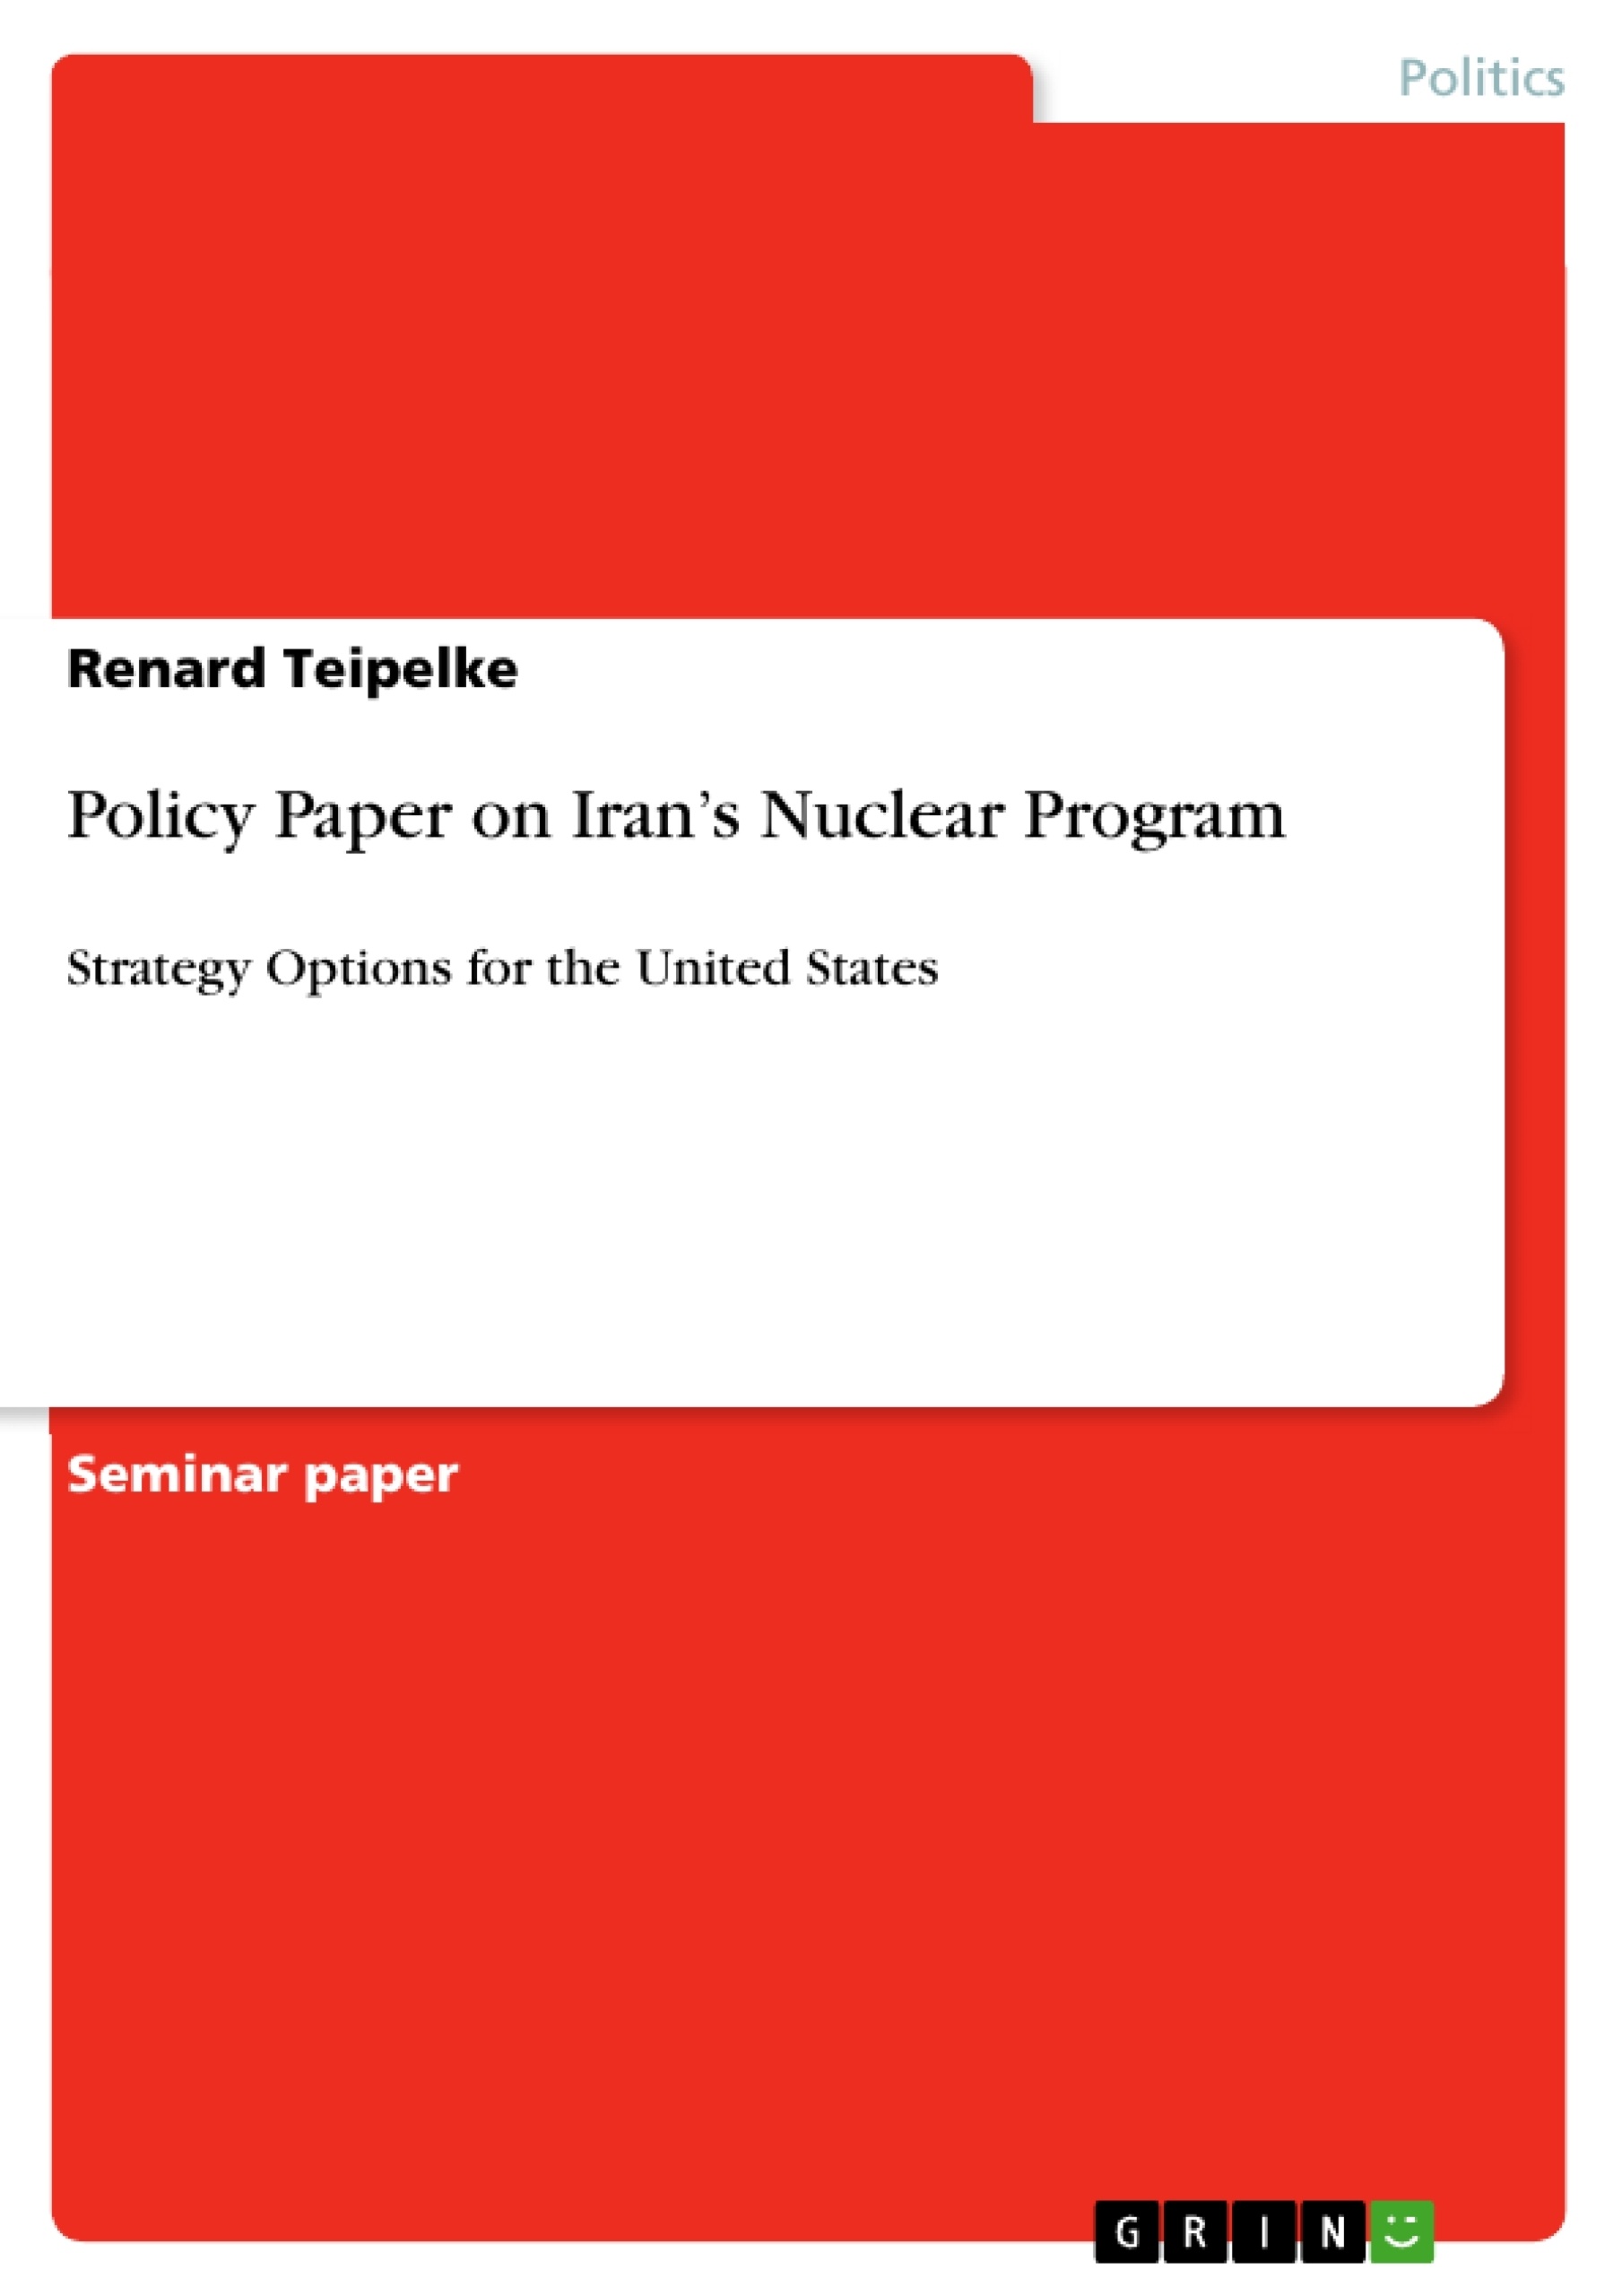 Title: Policy Paper on Iran’s Nuclear Program